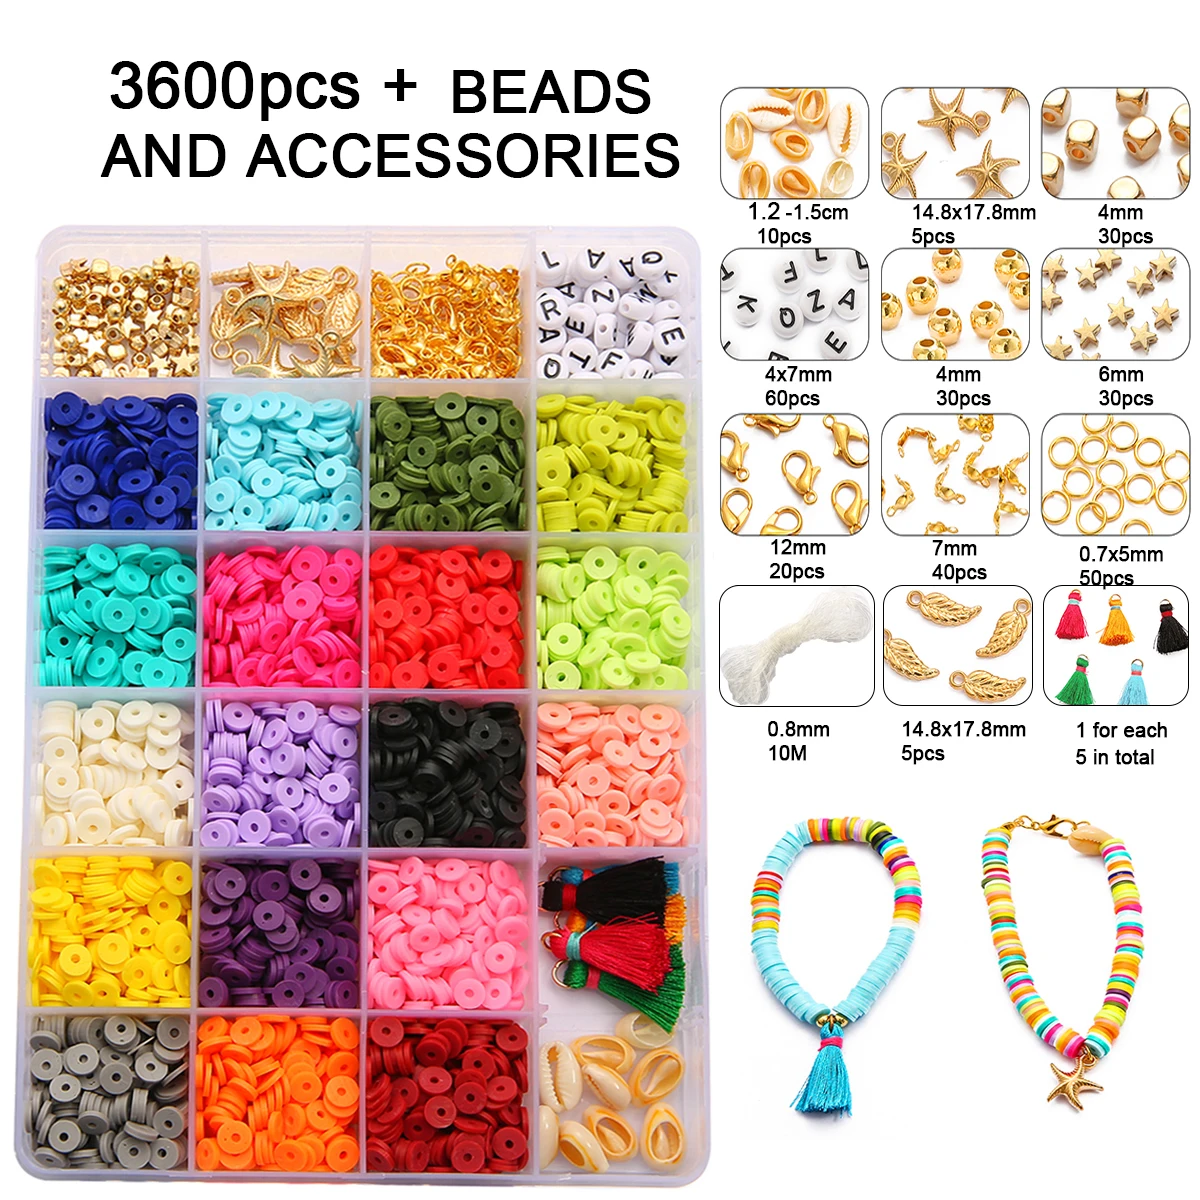 

3600pcs Flat Round Polymer Clay Spacer Beads Kit with Charms Elastic String Clasp for Jewelry Making Bracelets Necklace Earring, As picture